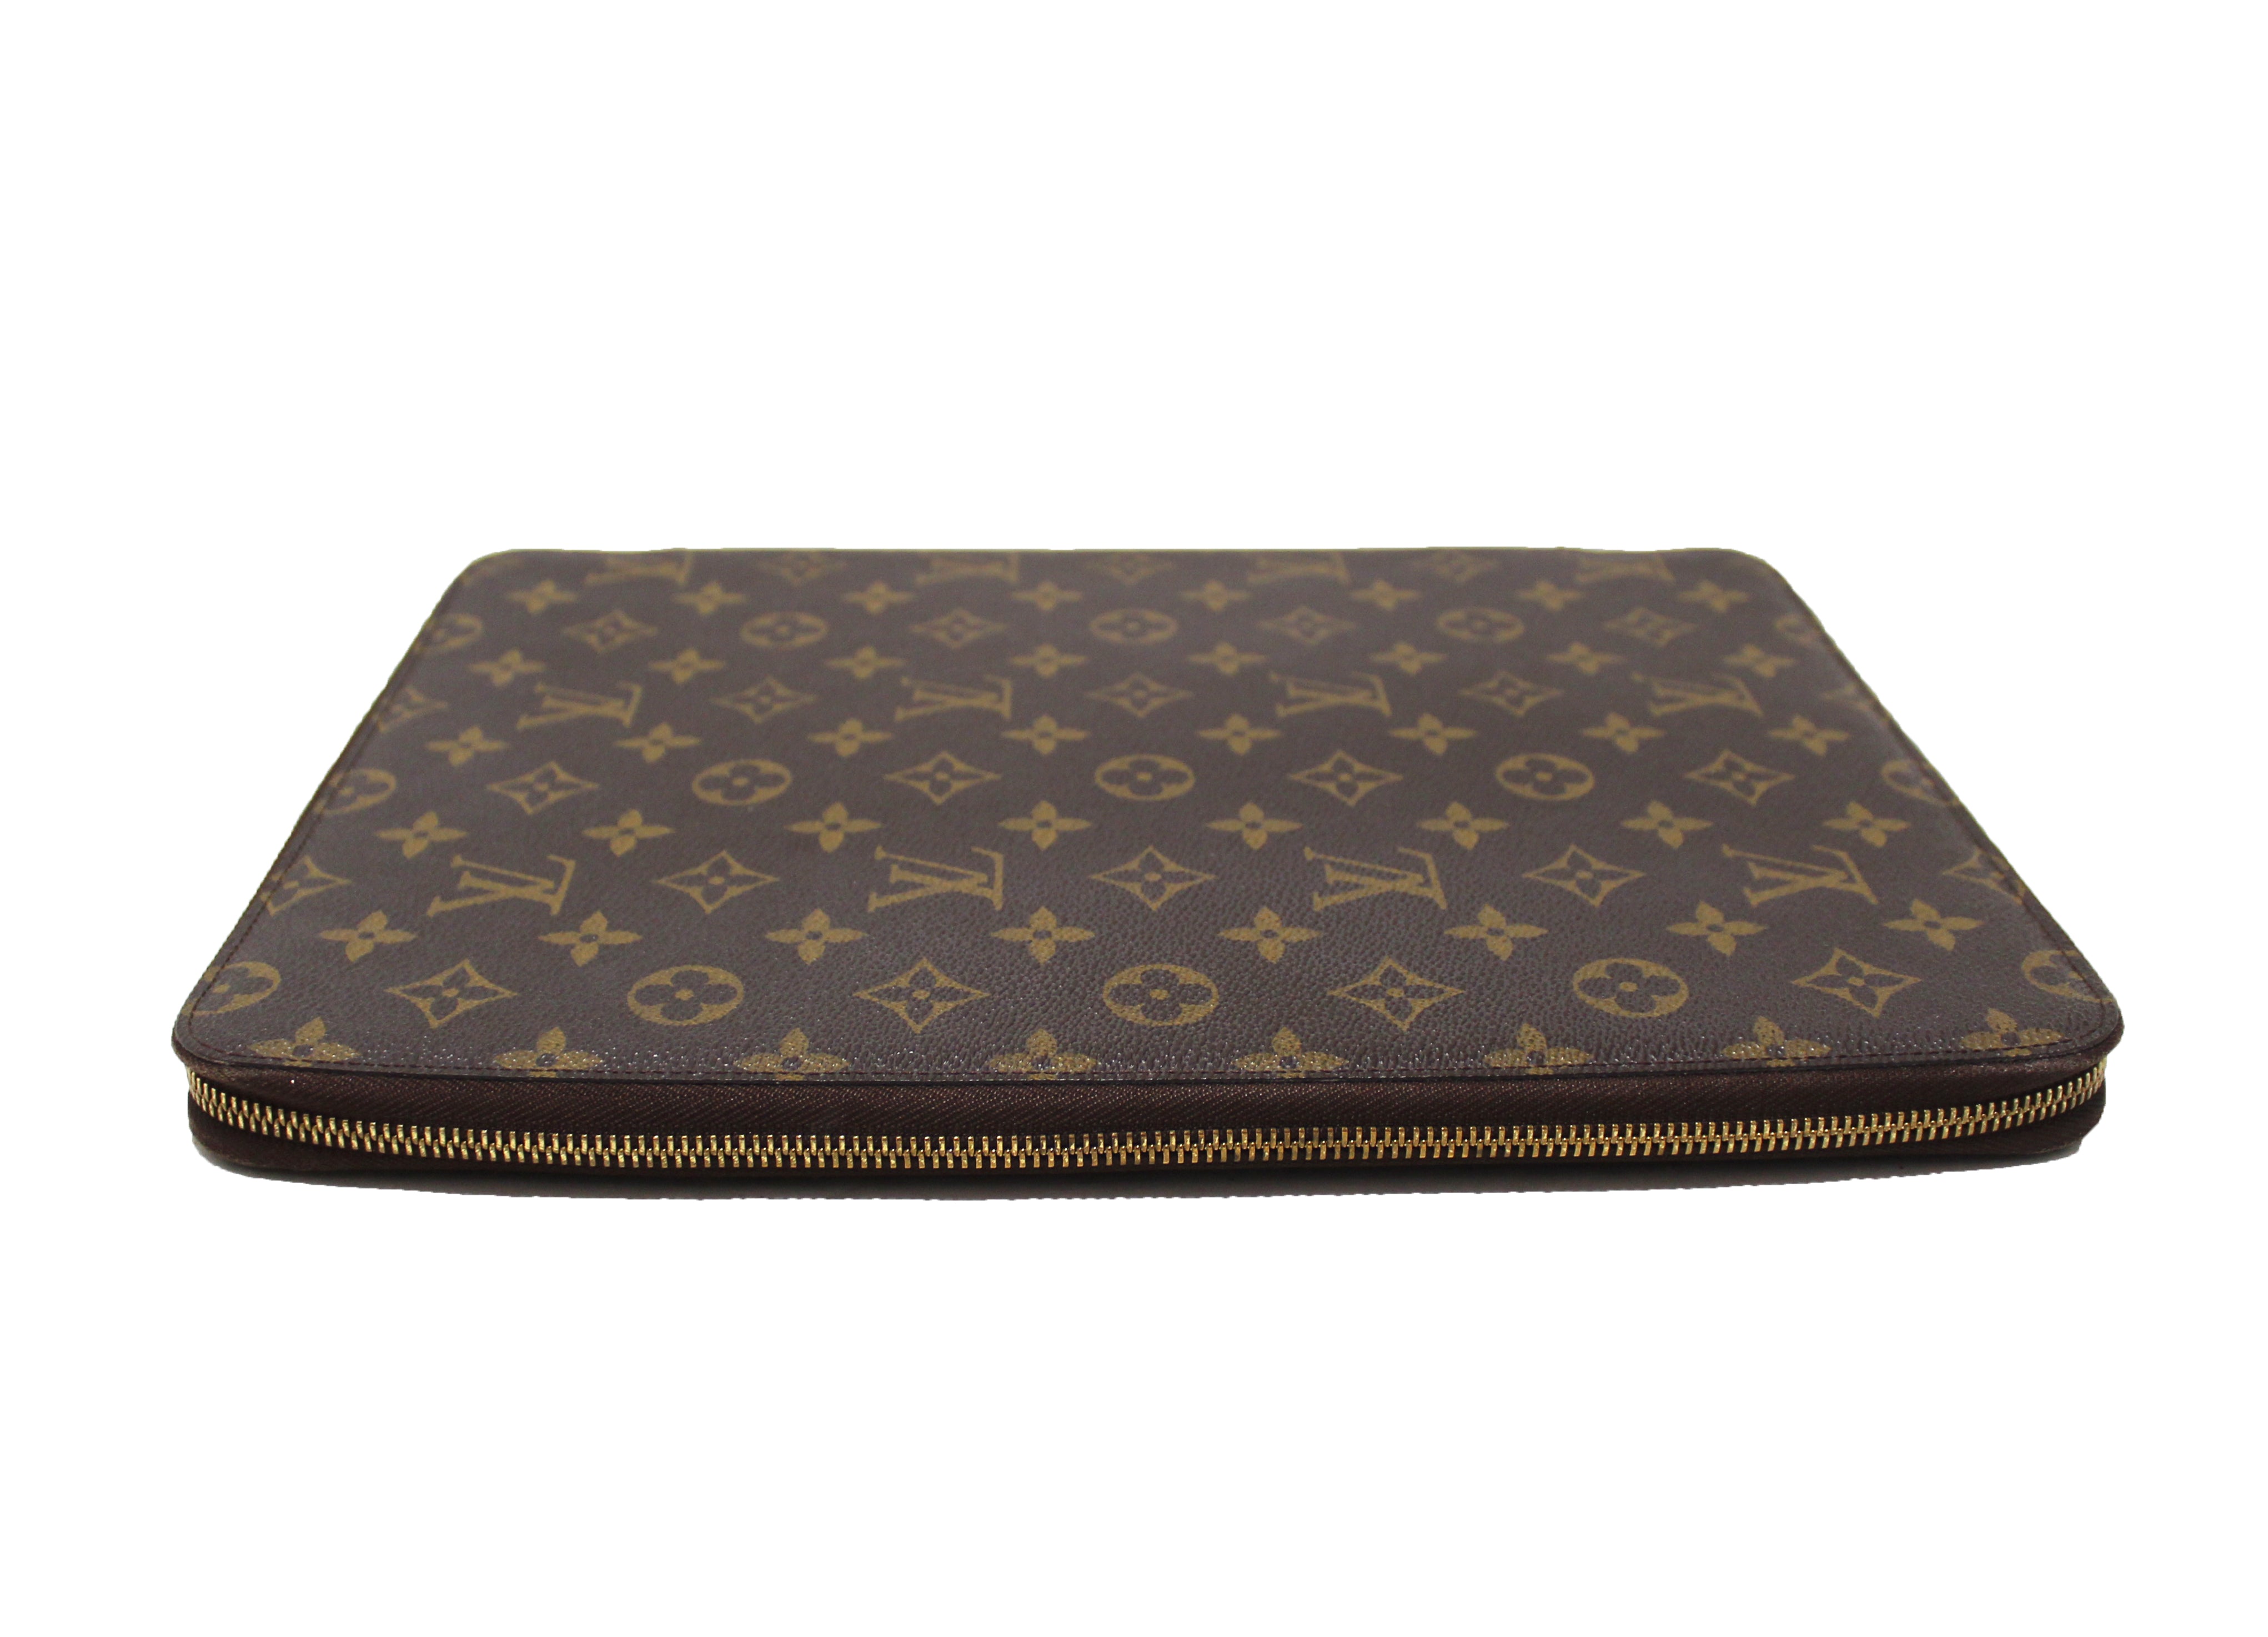 LOUIS VUITTON Monogram Organizer Zippered Document Holder Under License By  Fabric Design (Note Slight Blemish On Cover In Photos)